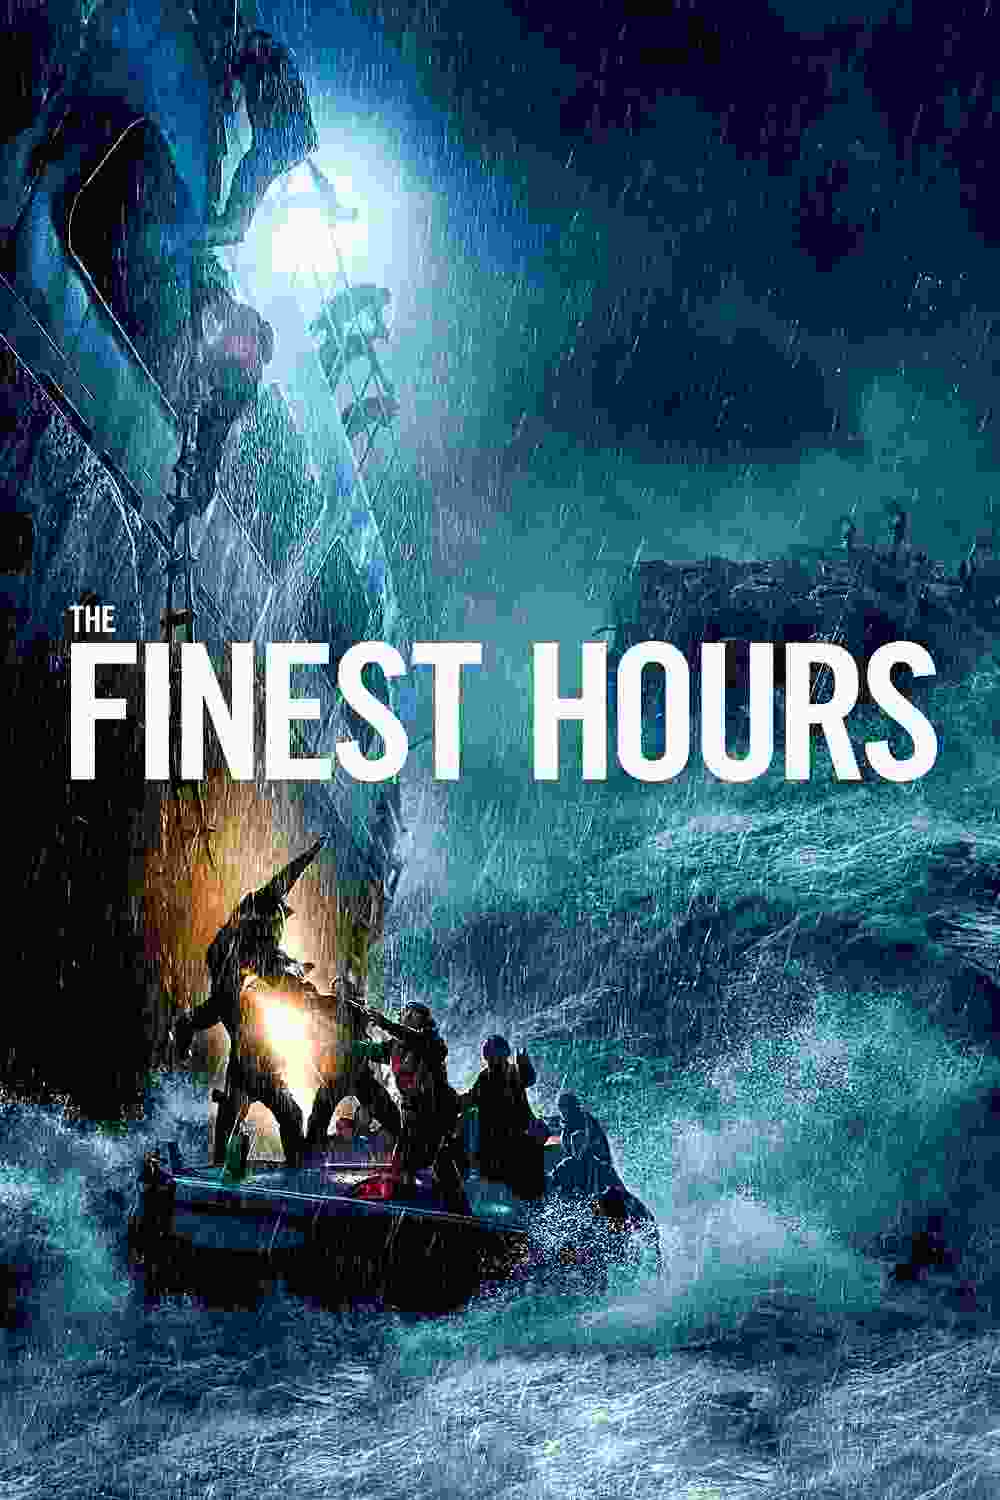 The Finest Hours (2016) Chris Pine